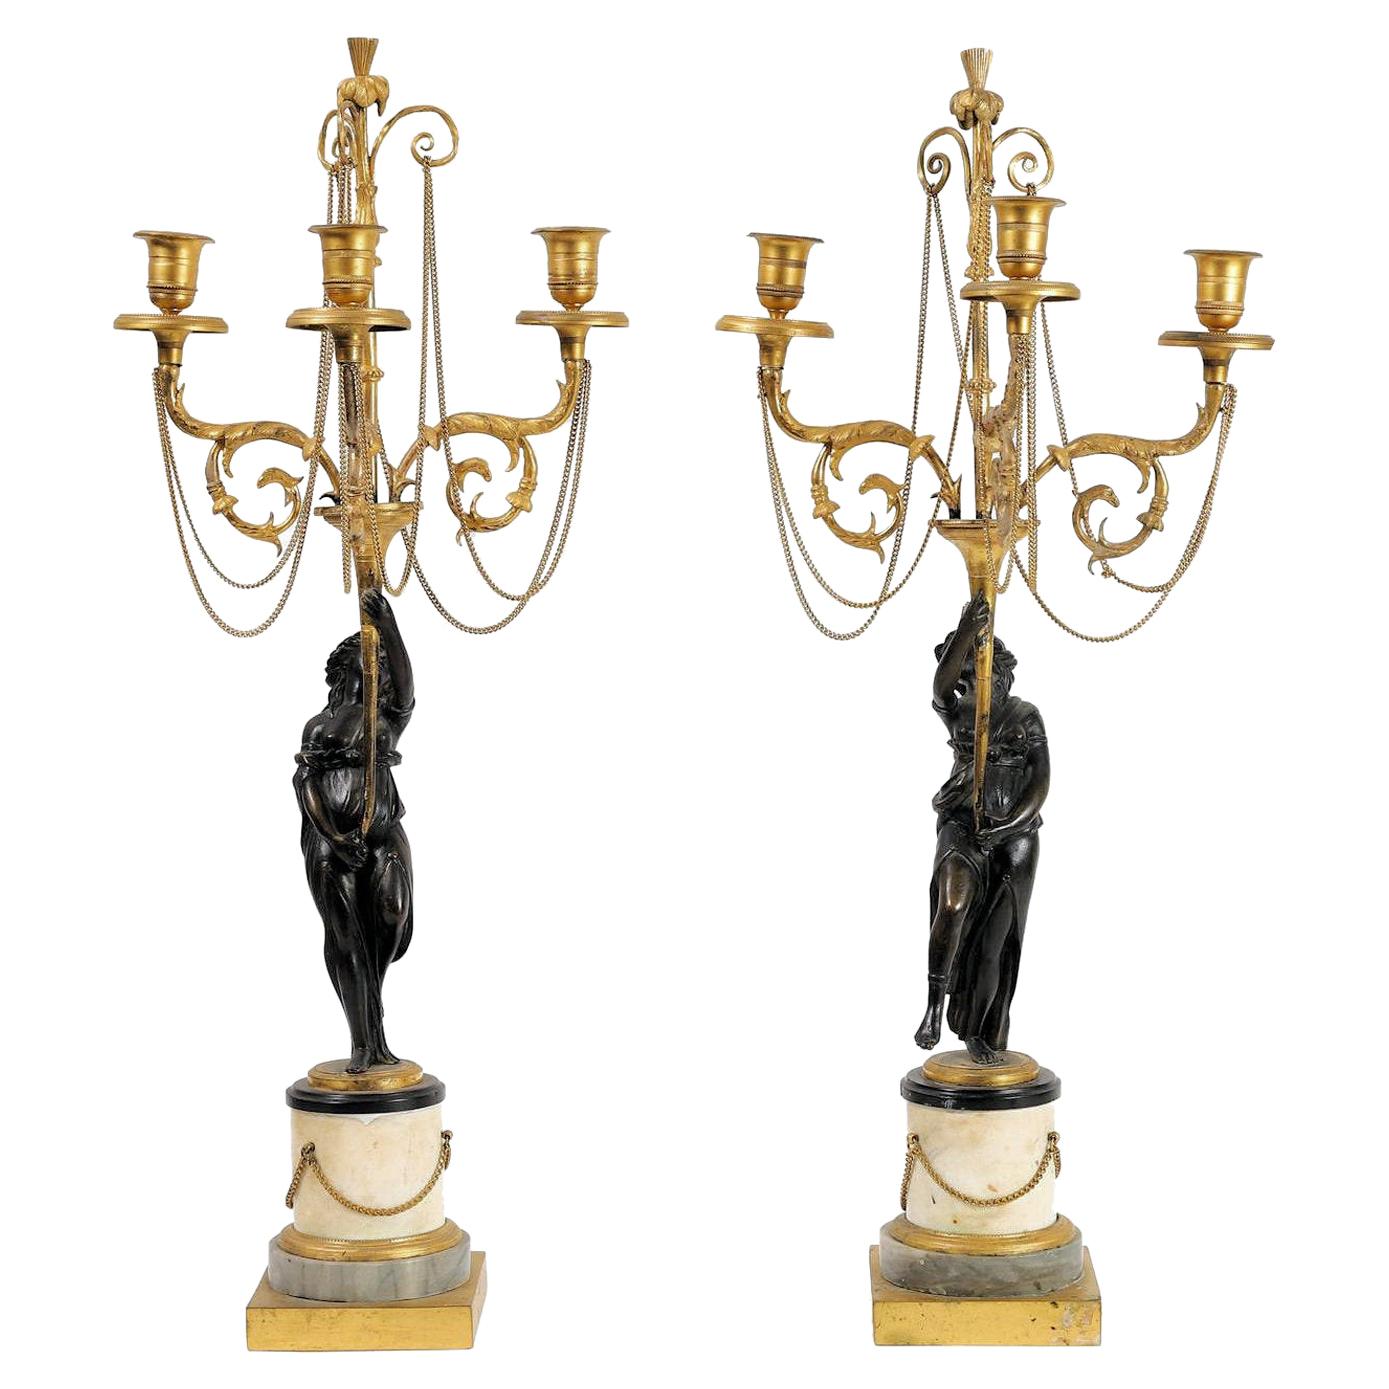 Pair of Neoclassical Directoire Gilt and Patinated Bronze Figural Candelabras